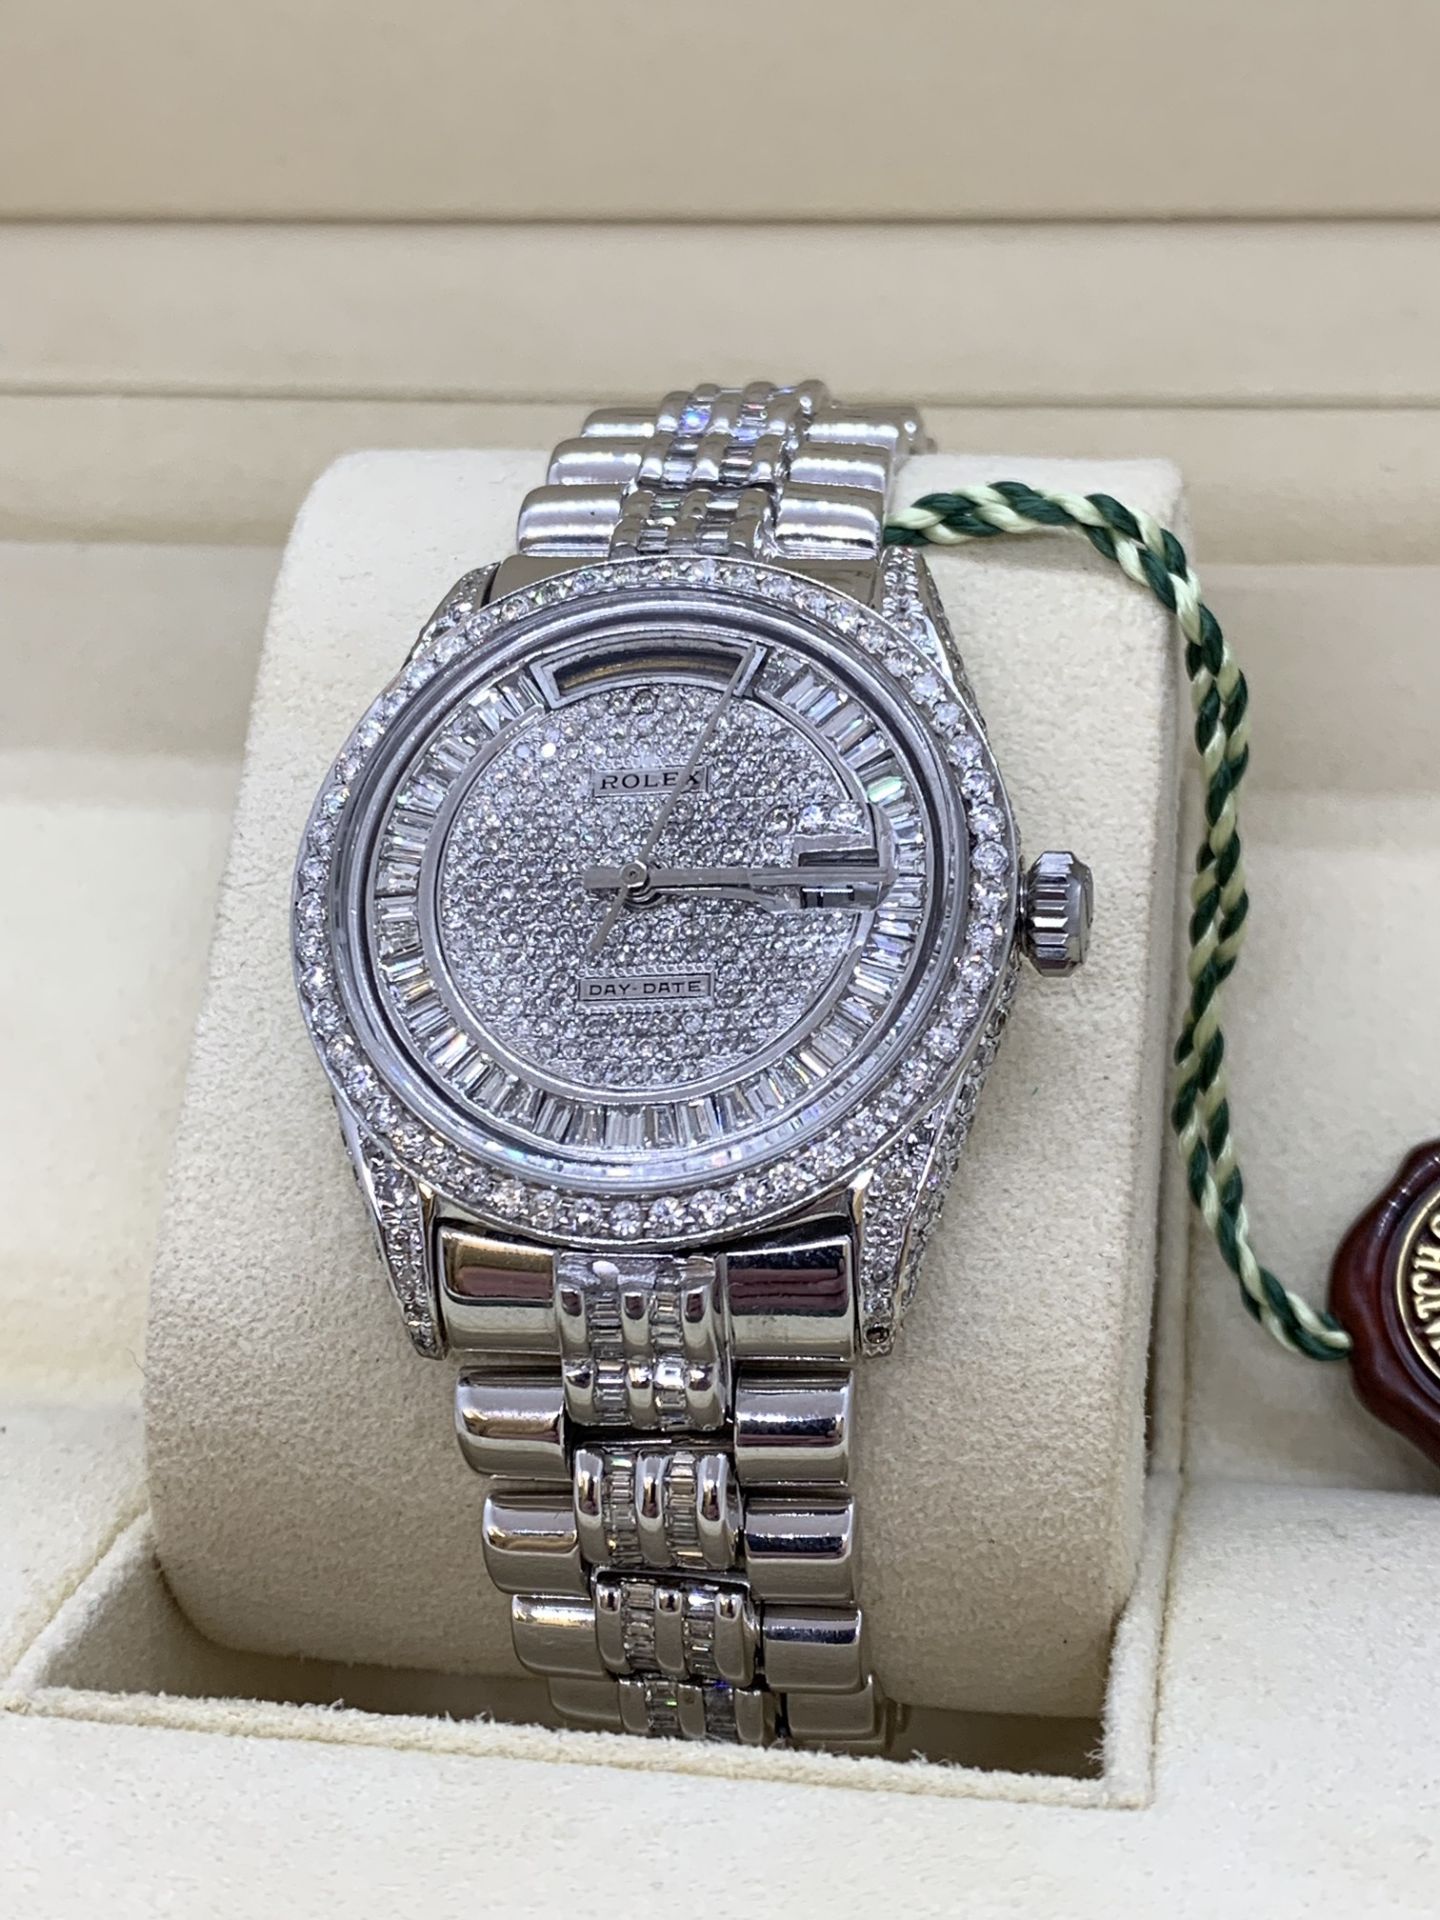 36mm DIAMOND SET DAY-DATE WATCH MARKED ROLEX SET IN WHITE METAL (TESTED AS GOLD) - Image 4 of 15